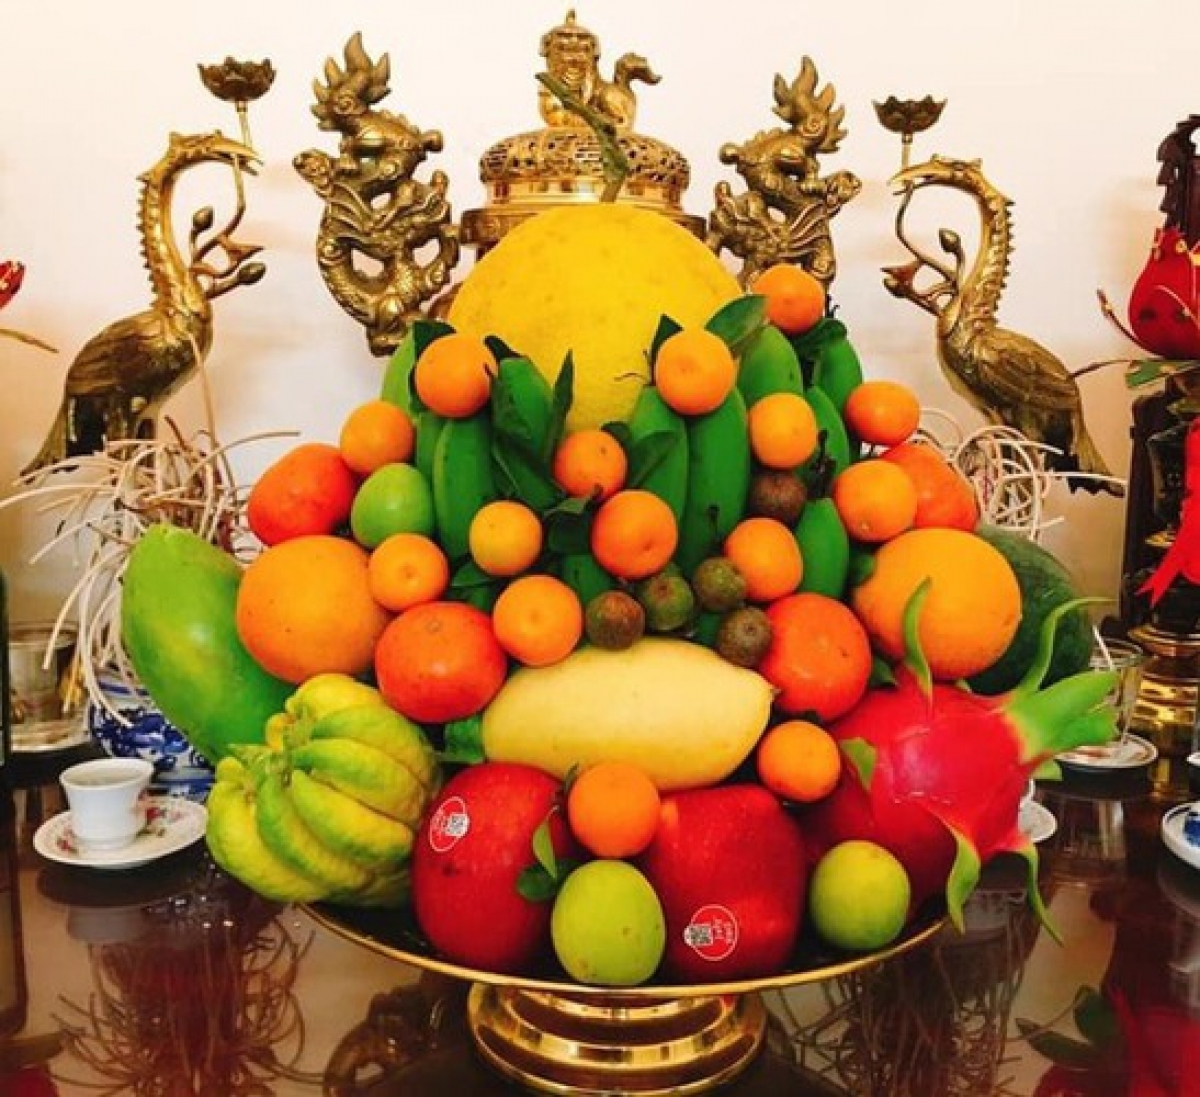 Arranging a five-fruit tray and placing it upon family alters is a Vietnamese custom that takes place during Tet as a sign of respect and gratitude to ancestors. In northern Vietnam the tray will often include bananas, pomelos, peaches, kumquats, and persimmons. In contrast, trays in the south will include custard apples, coconuts, papayas, mangos, and figs, symbolising the wishes of southerners of “just enough to spend”.